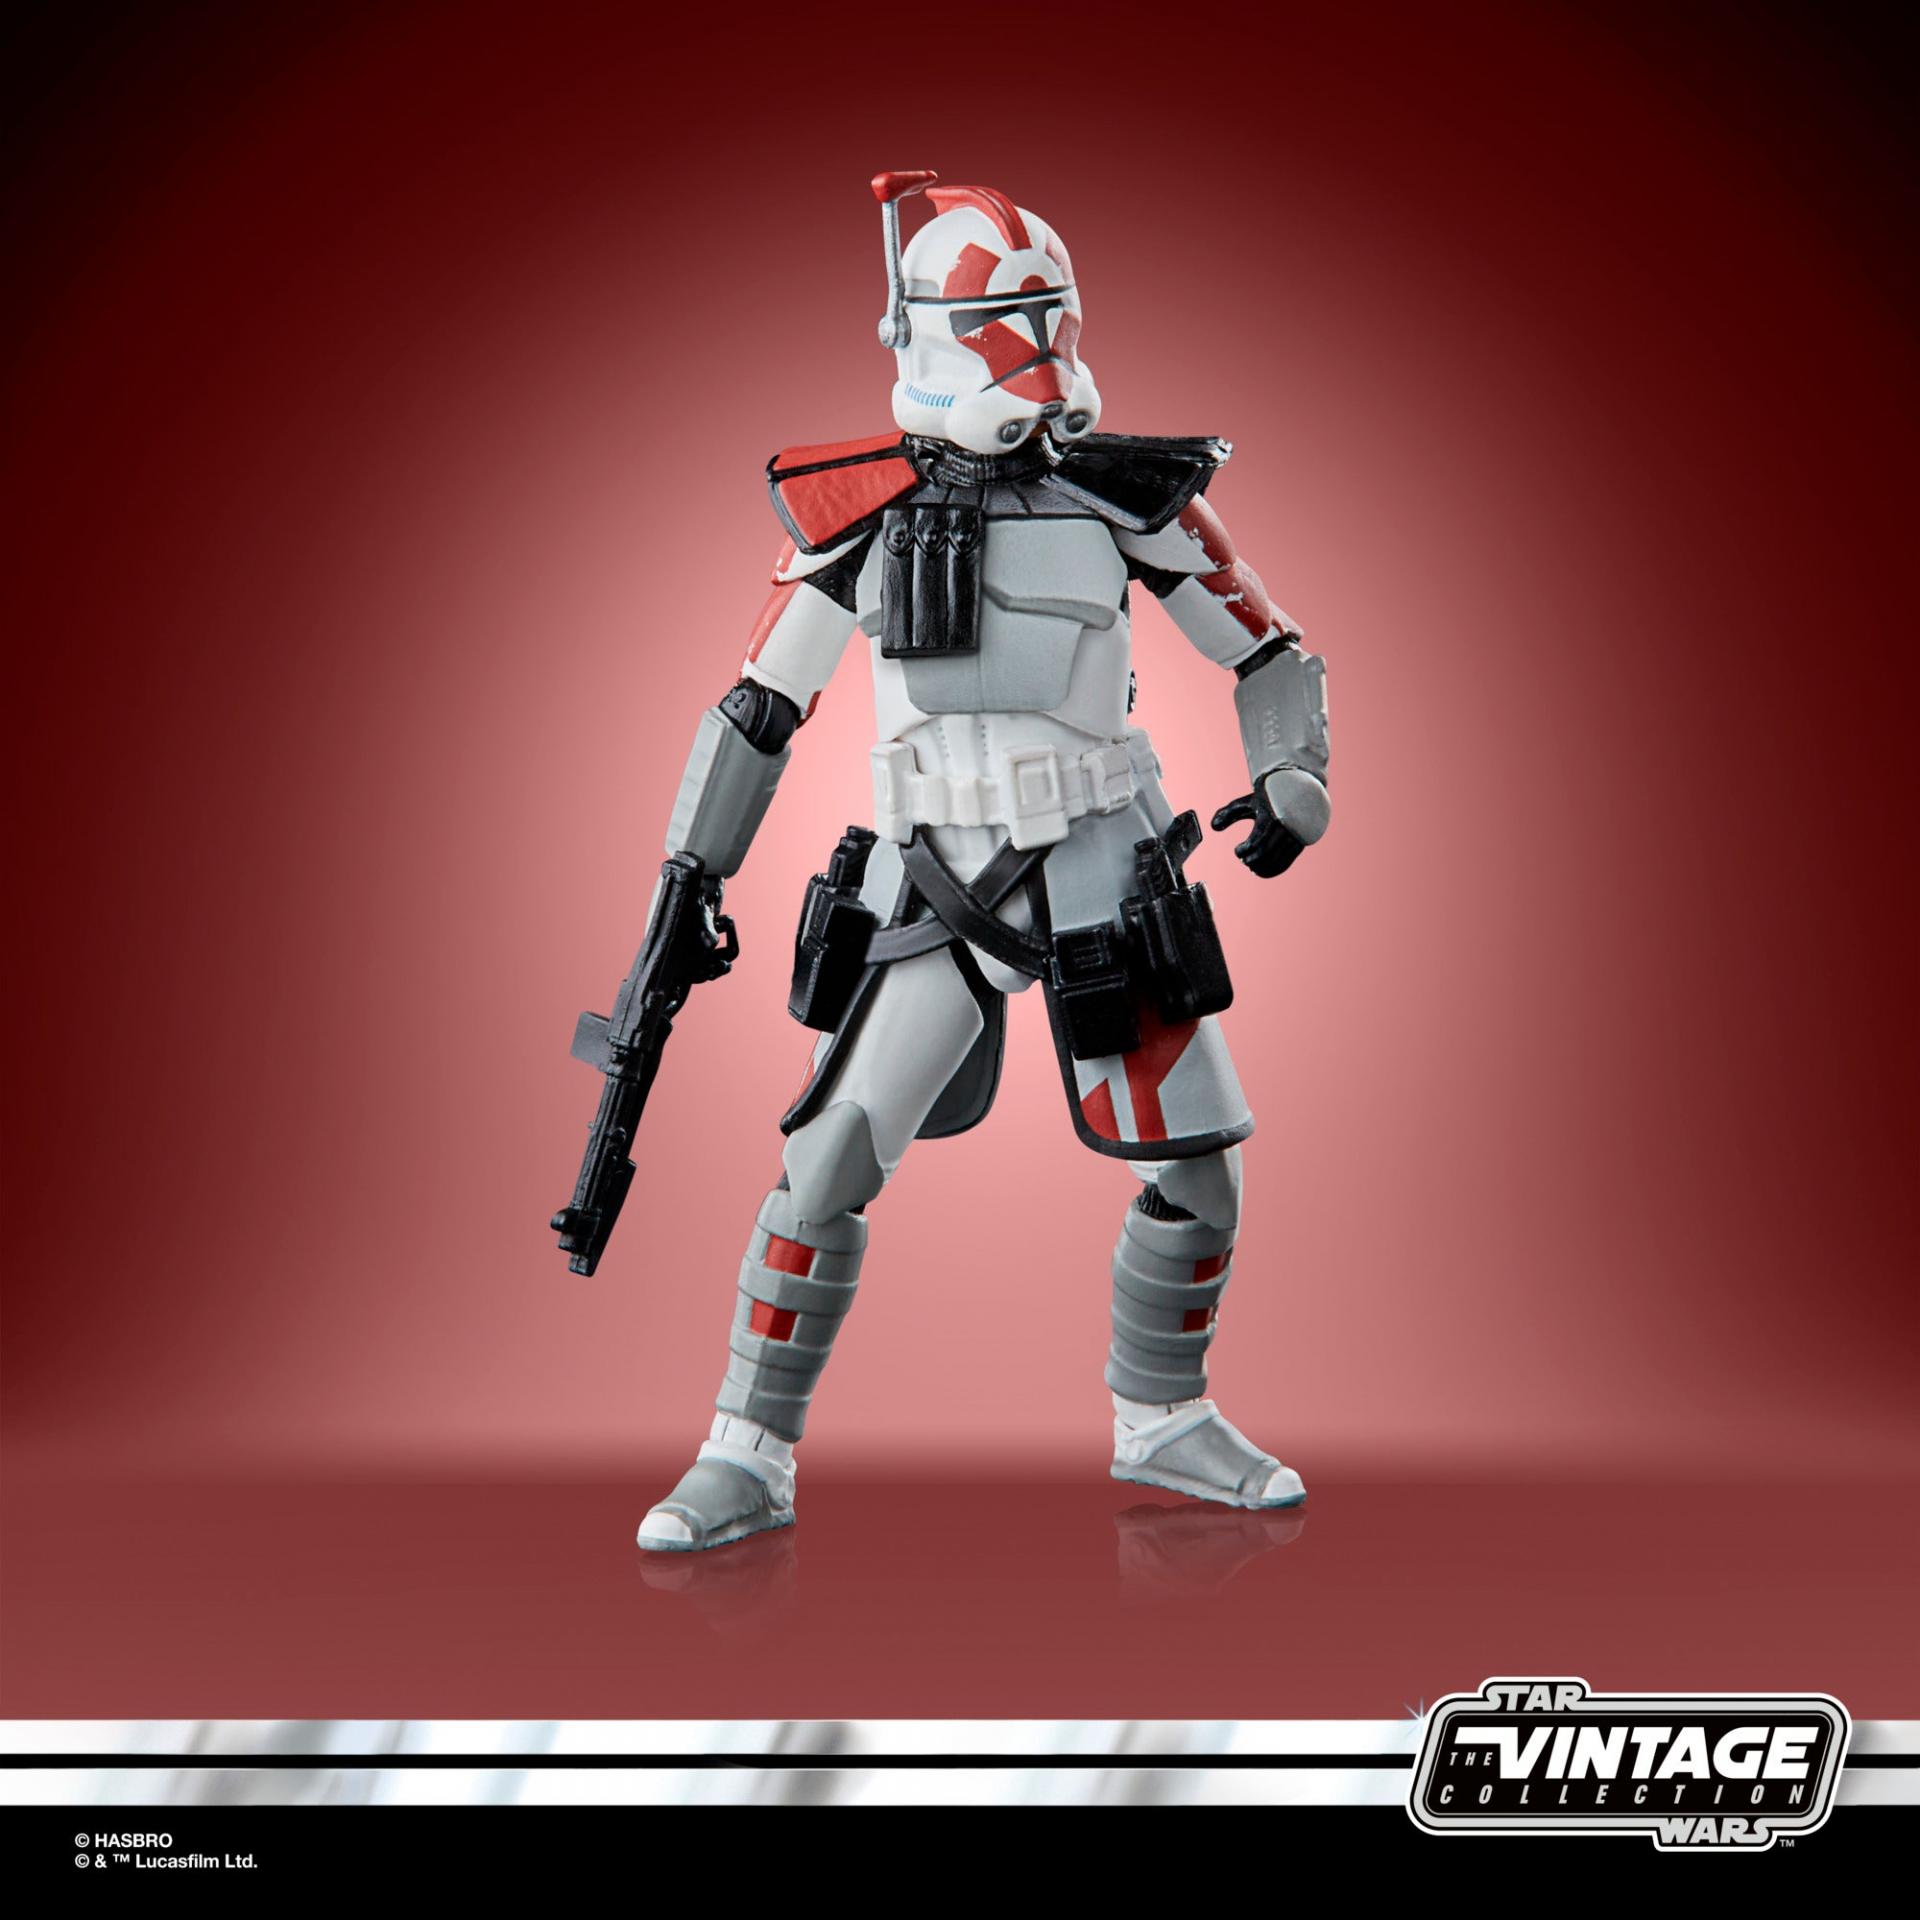 Star wars the vintage collection gaming greats arc trooper star wars battlefront ii jawascave 6